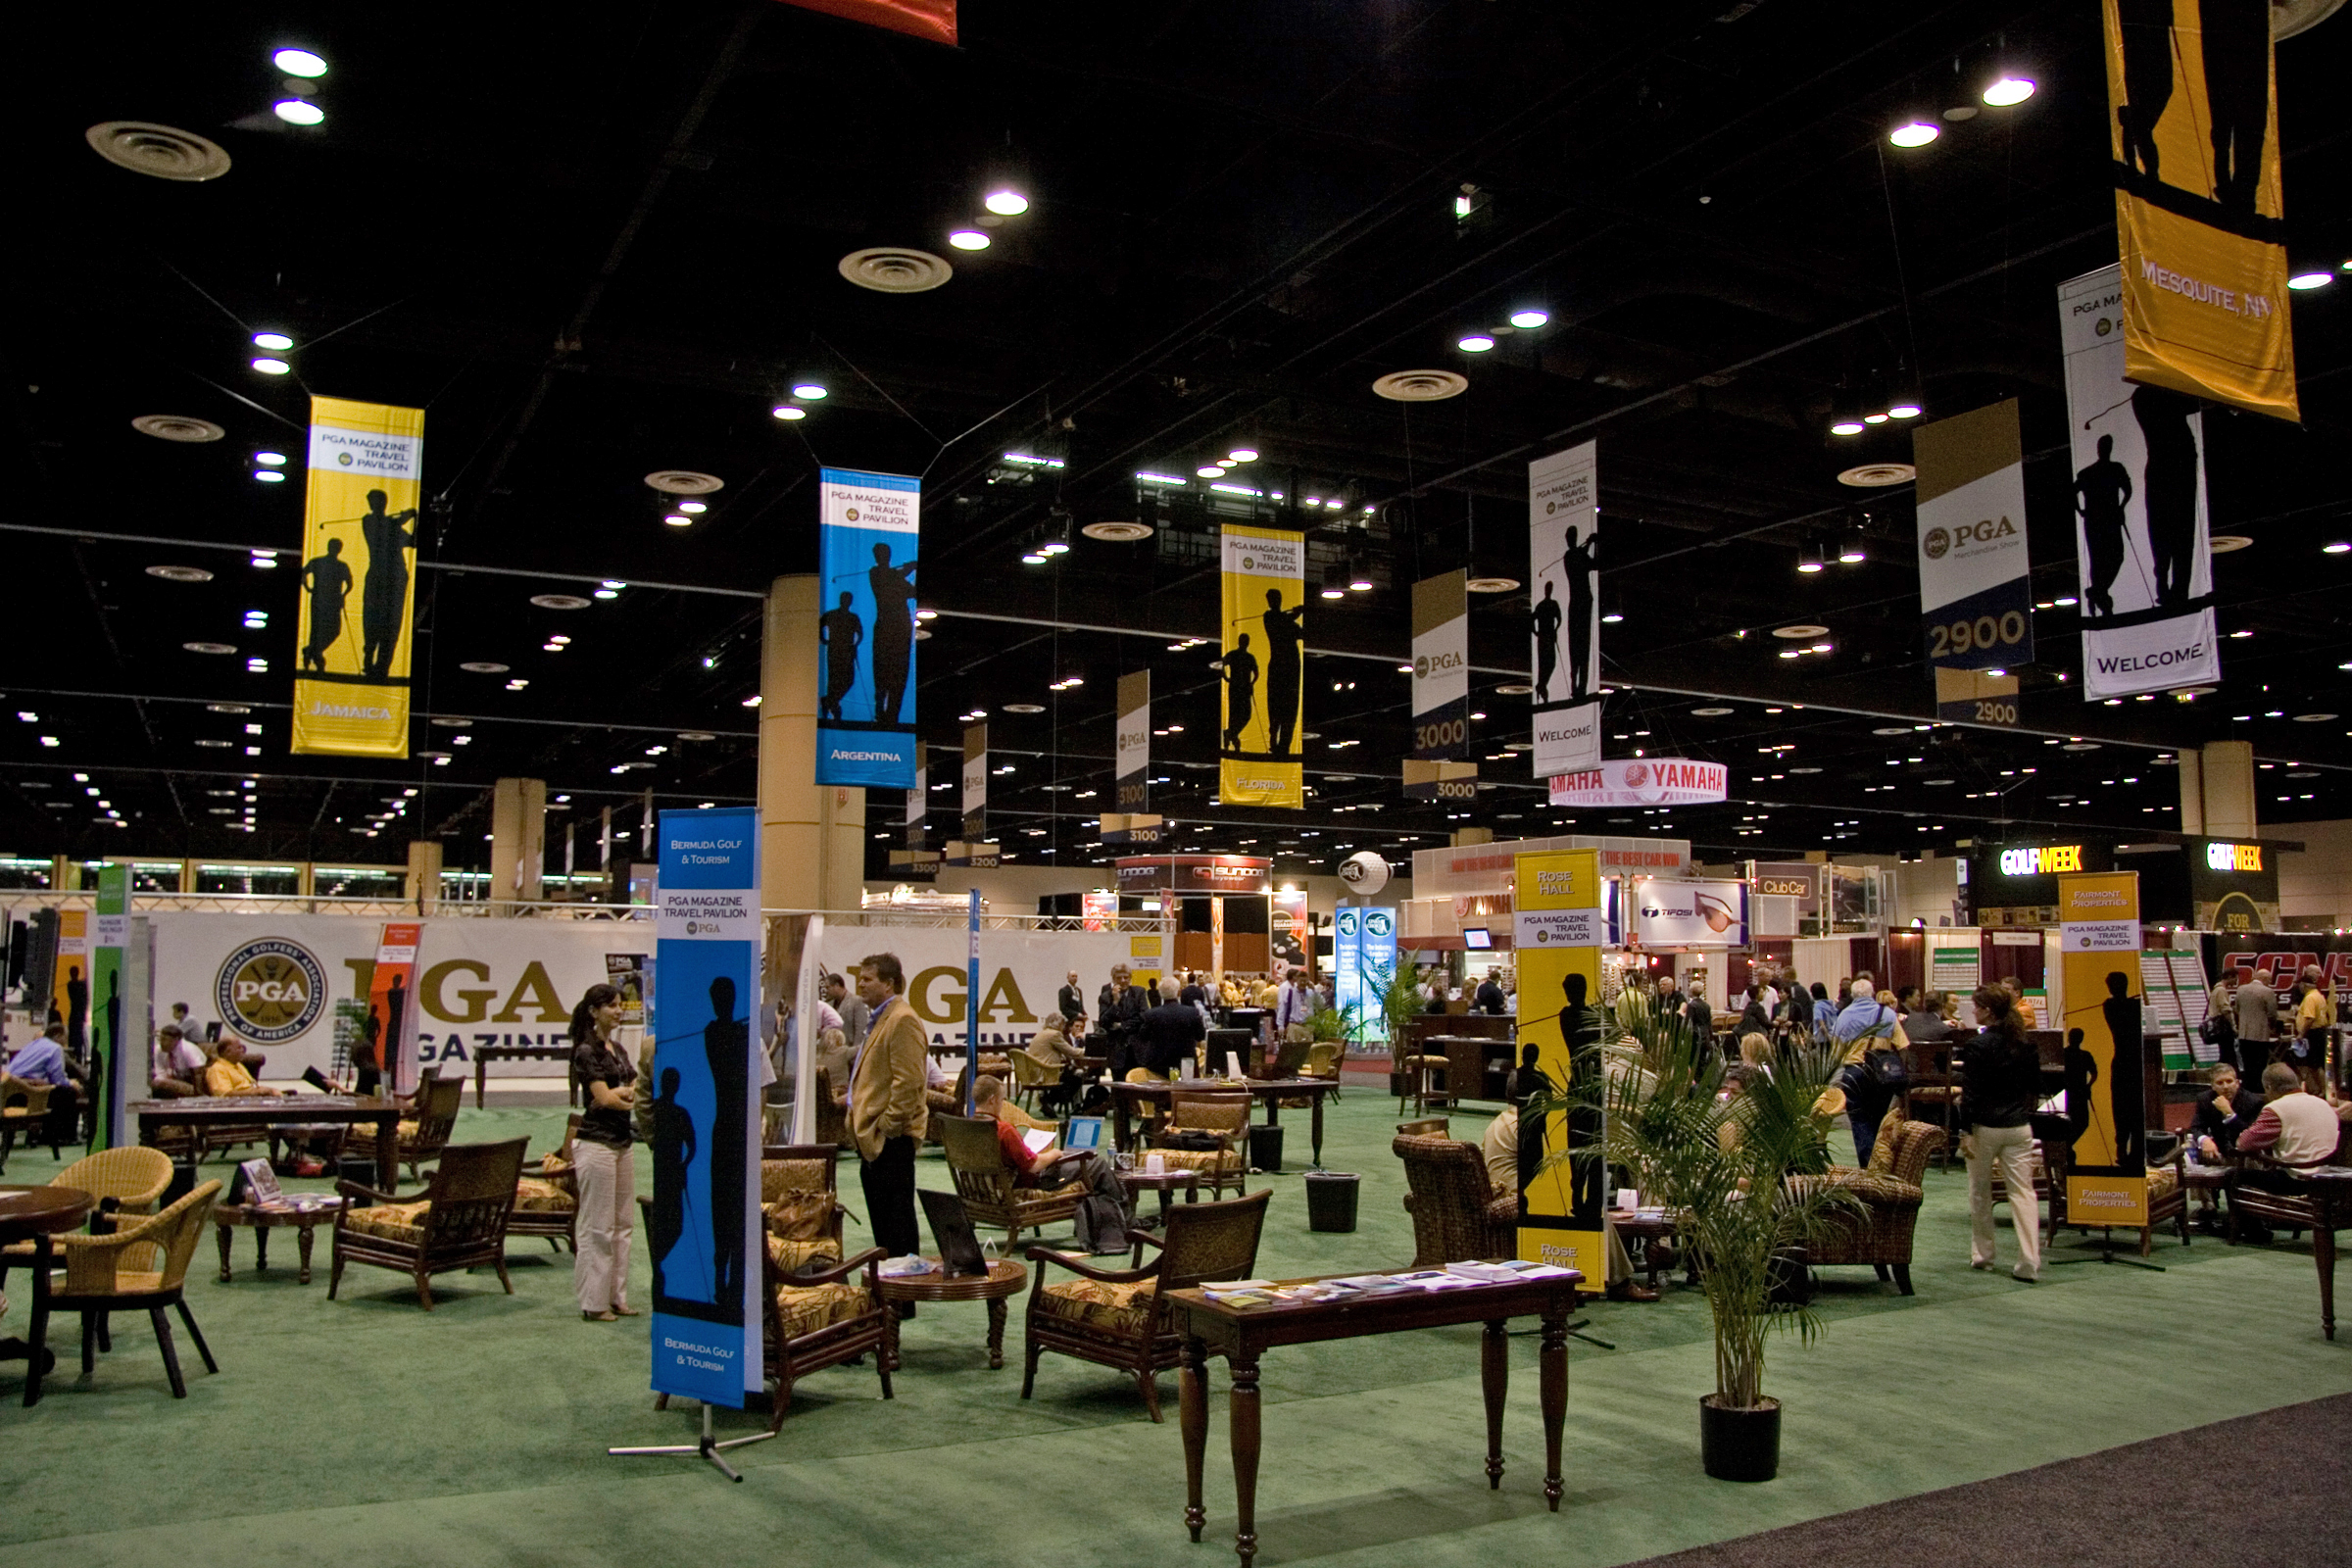 Demo Day at the PGA Merchandise Show, 2009.